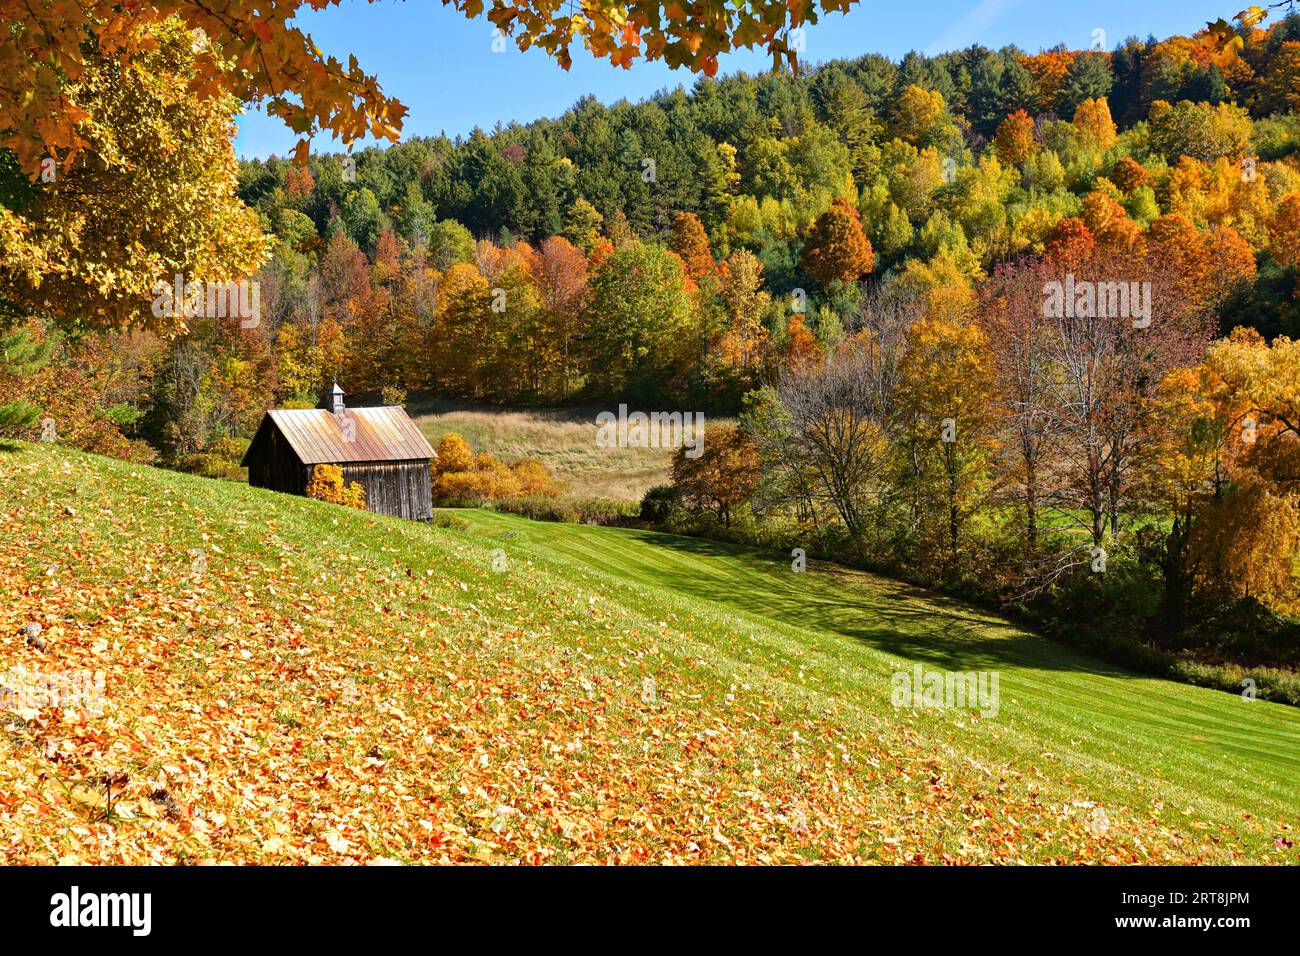 Autumn countryside with colorful fall leaves and rustic wooden barn near Woodstock, Vermont, USA Stock Photo